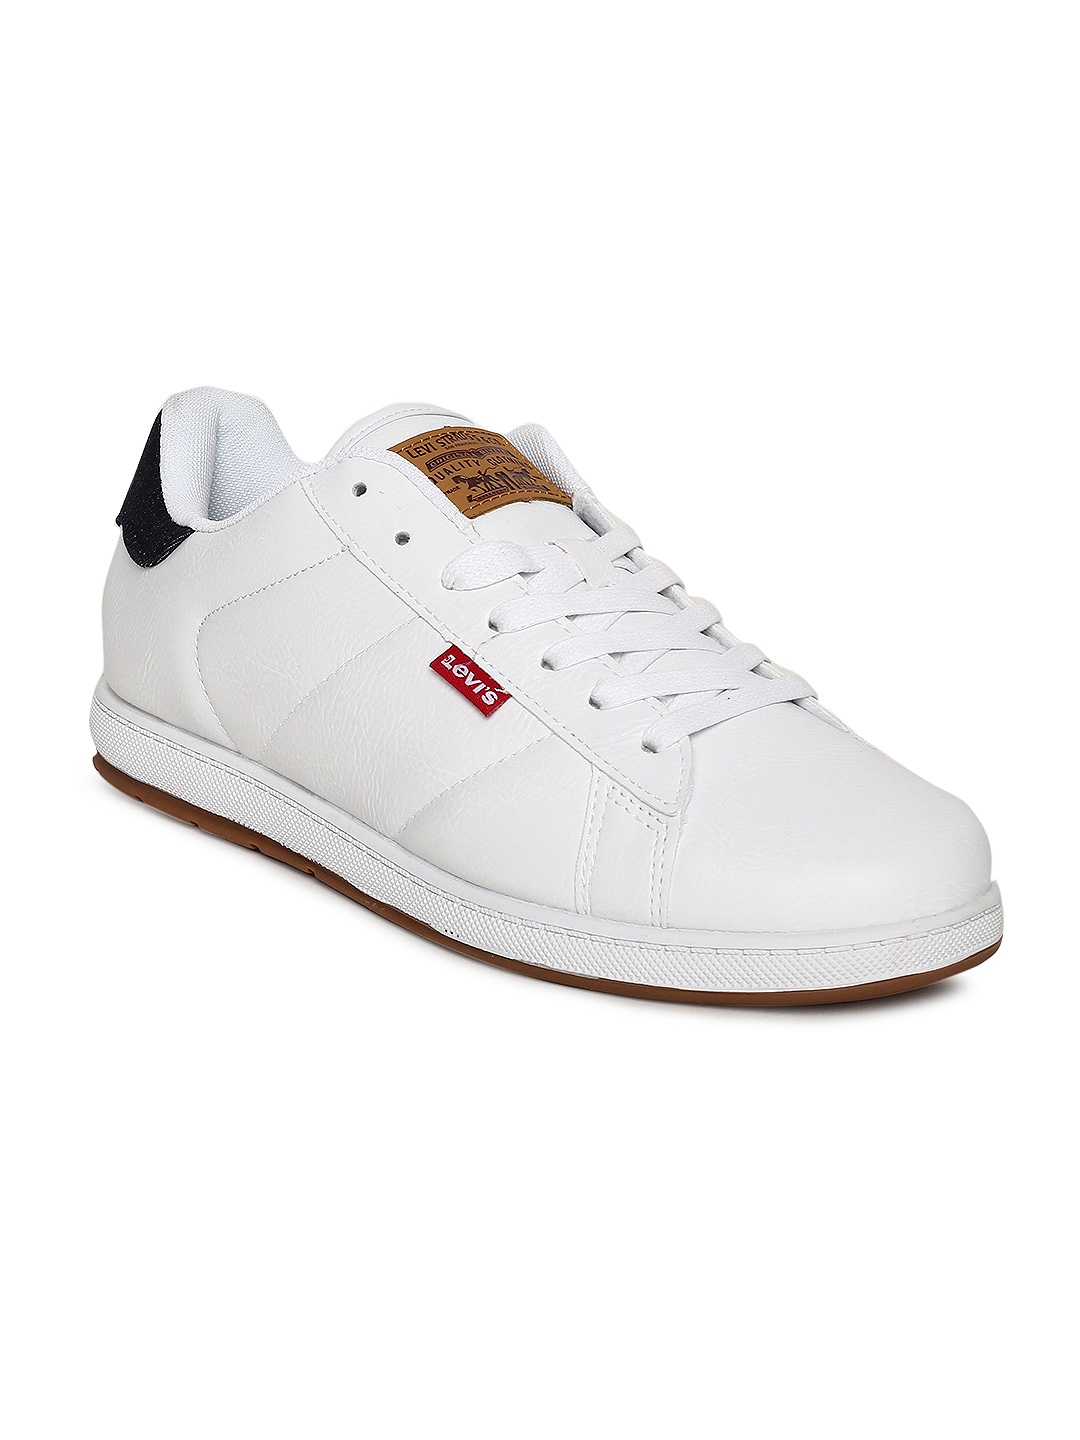 levis white casual shoes